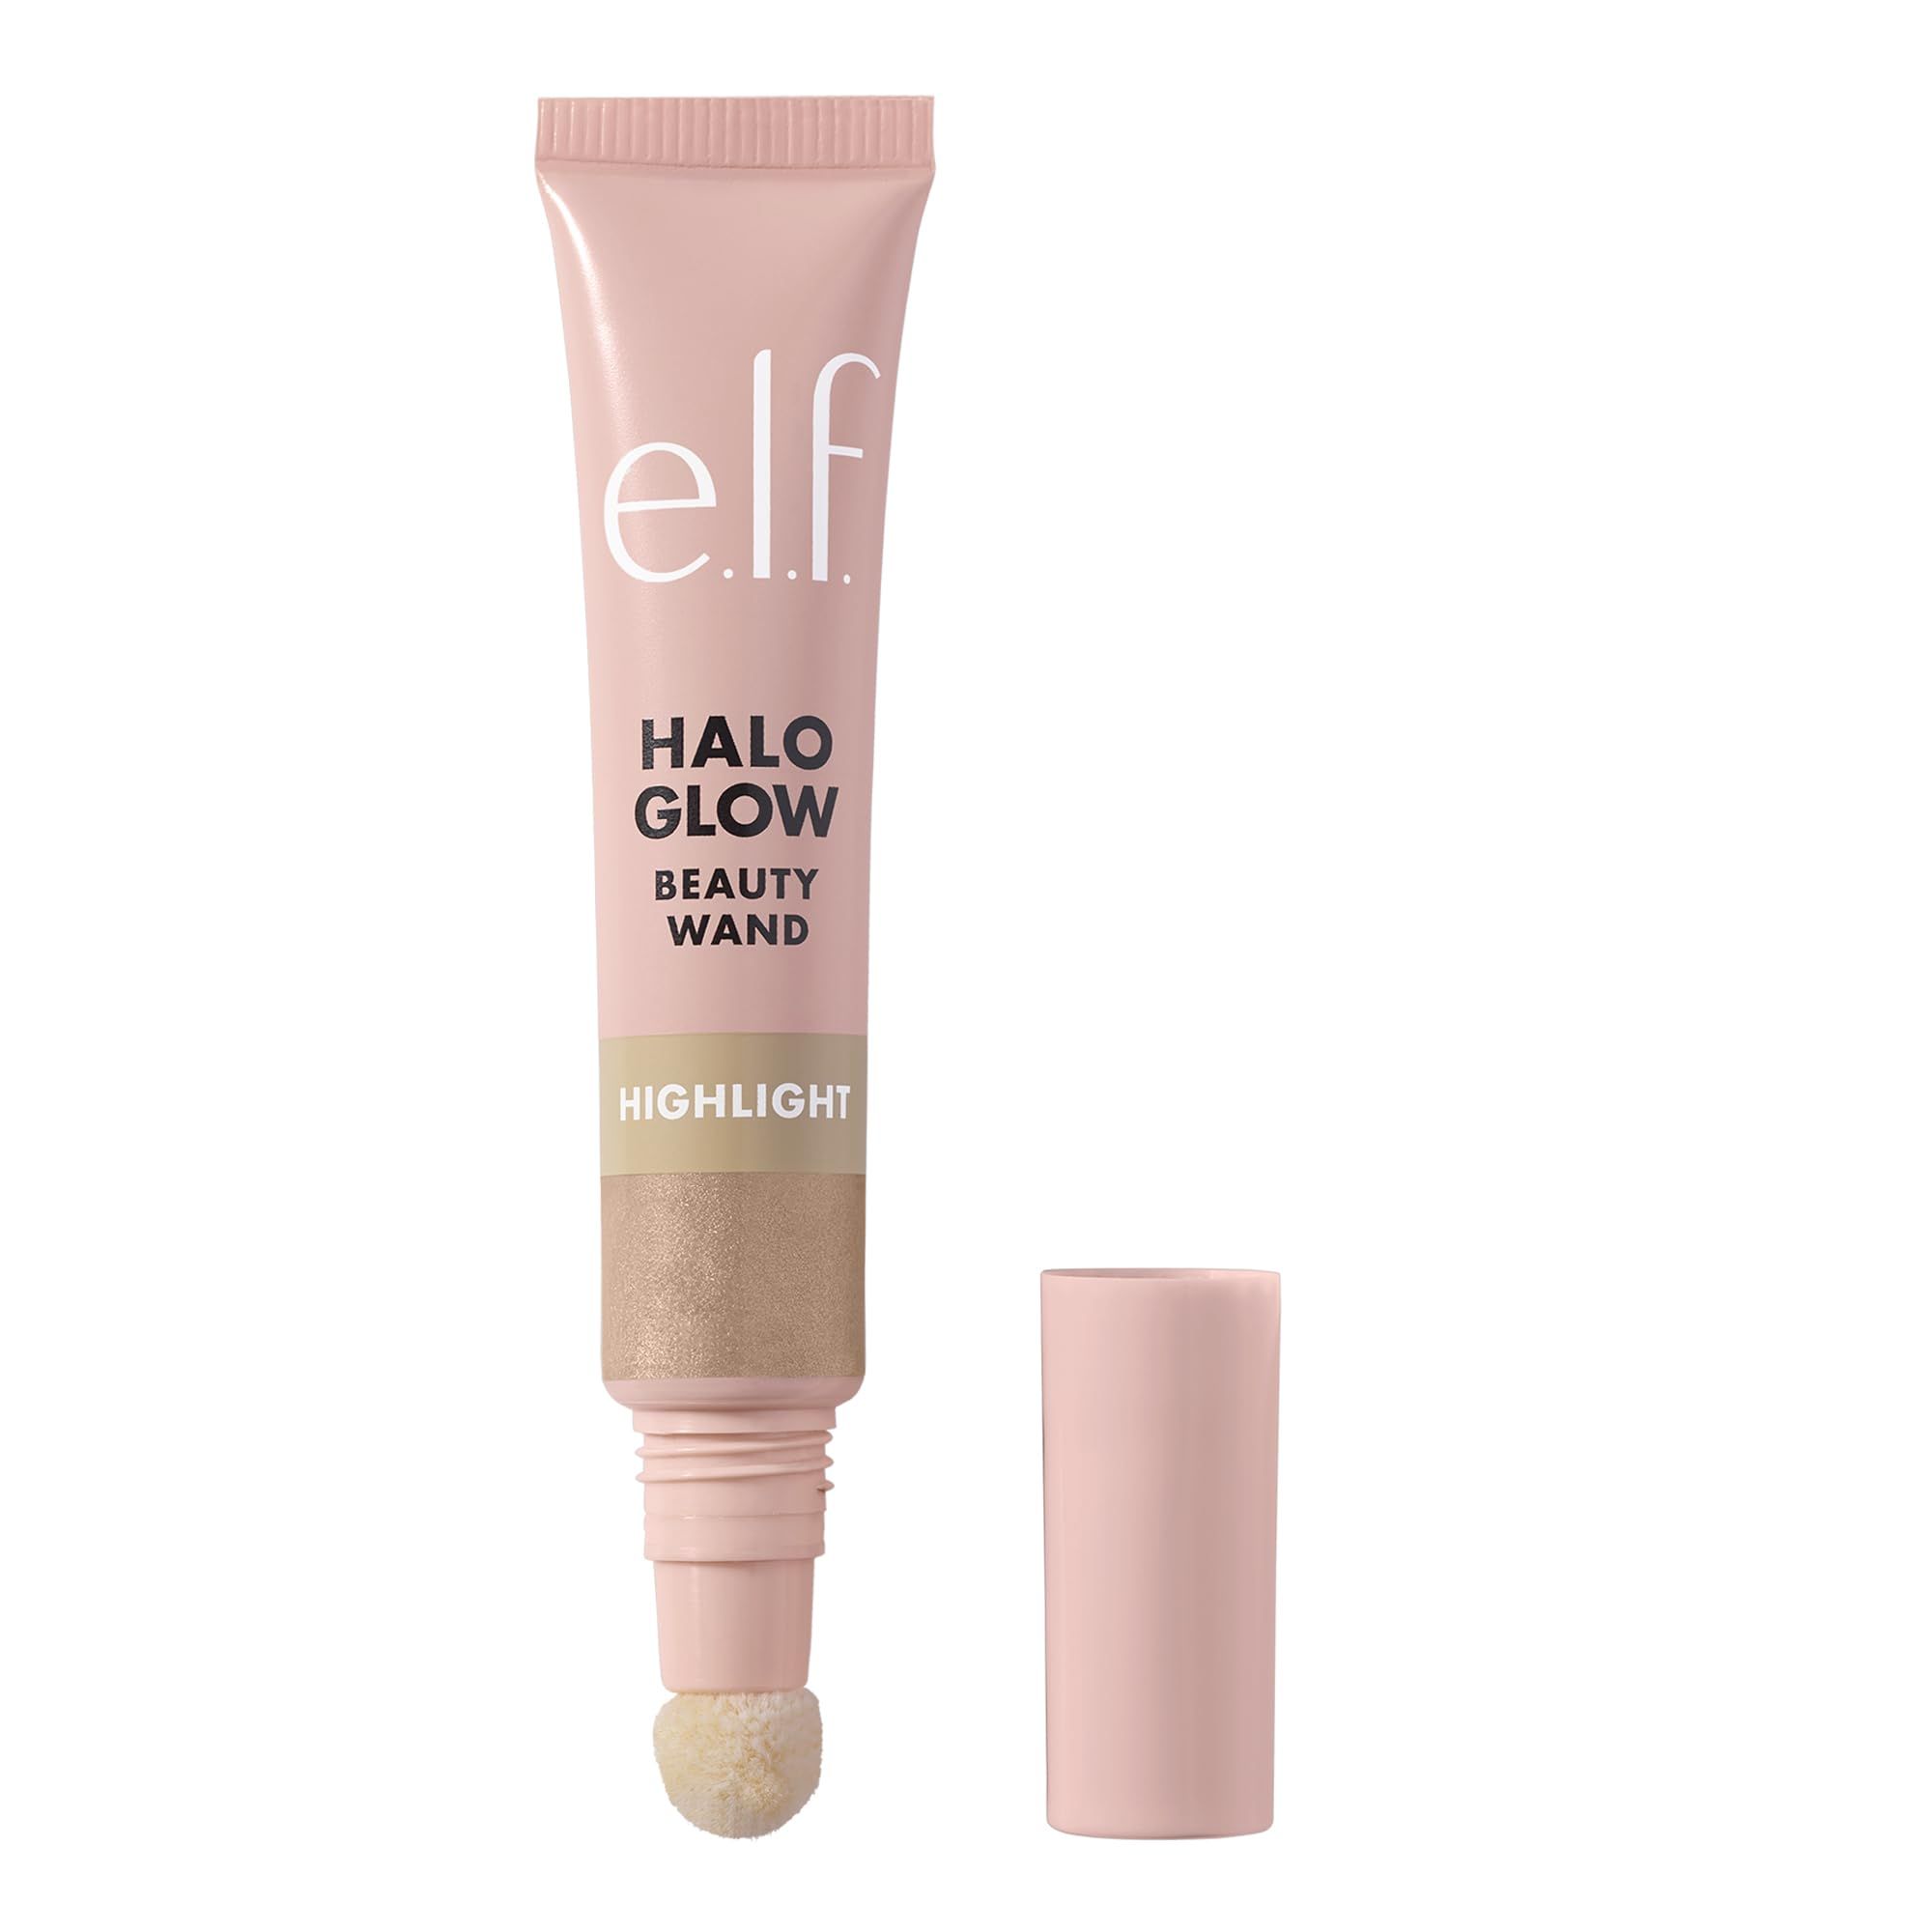 e.l.f. Halo Glow Highlight Beauty Wand, Liquid Highlighter Wand For Luminous, Glowing Skin, Buildable Formula, Vegan & Cruelty-free,Champagne Campaign | Amazon (US)